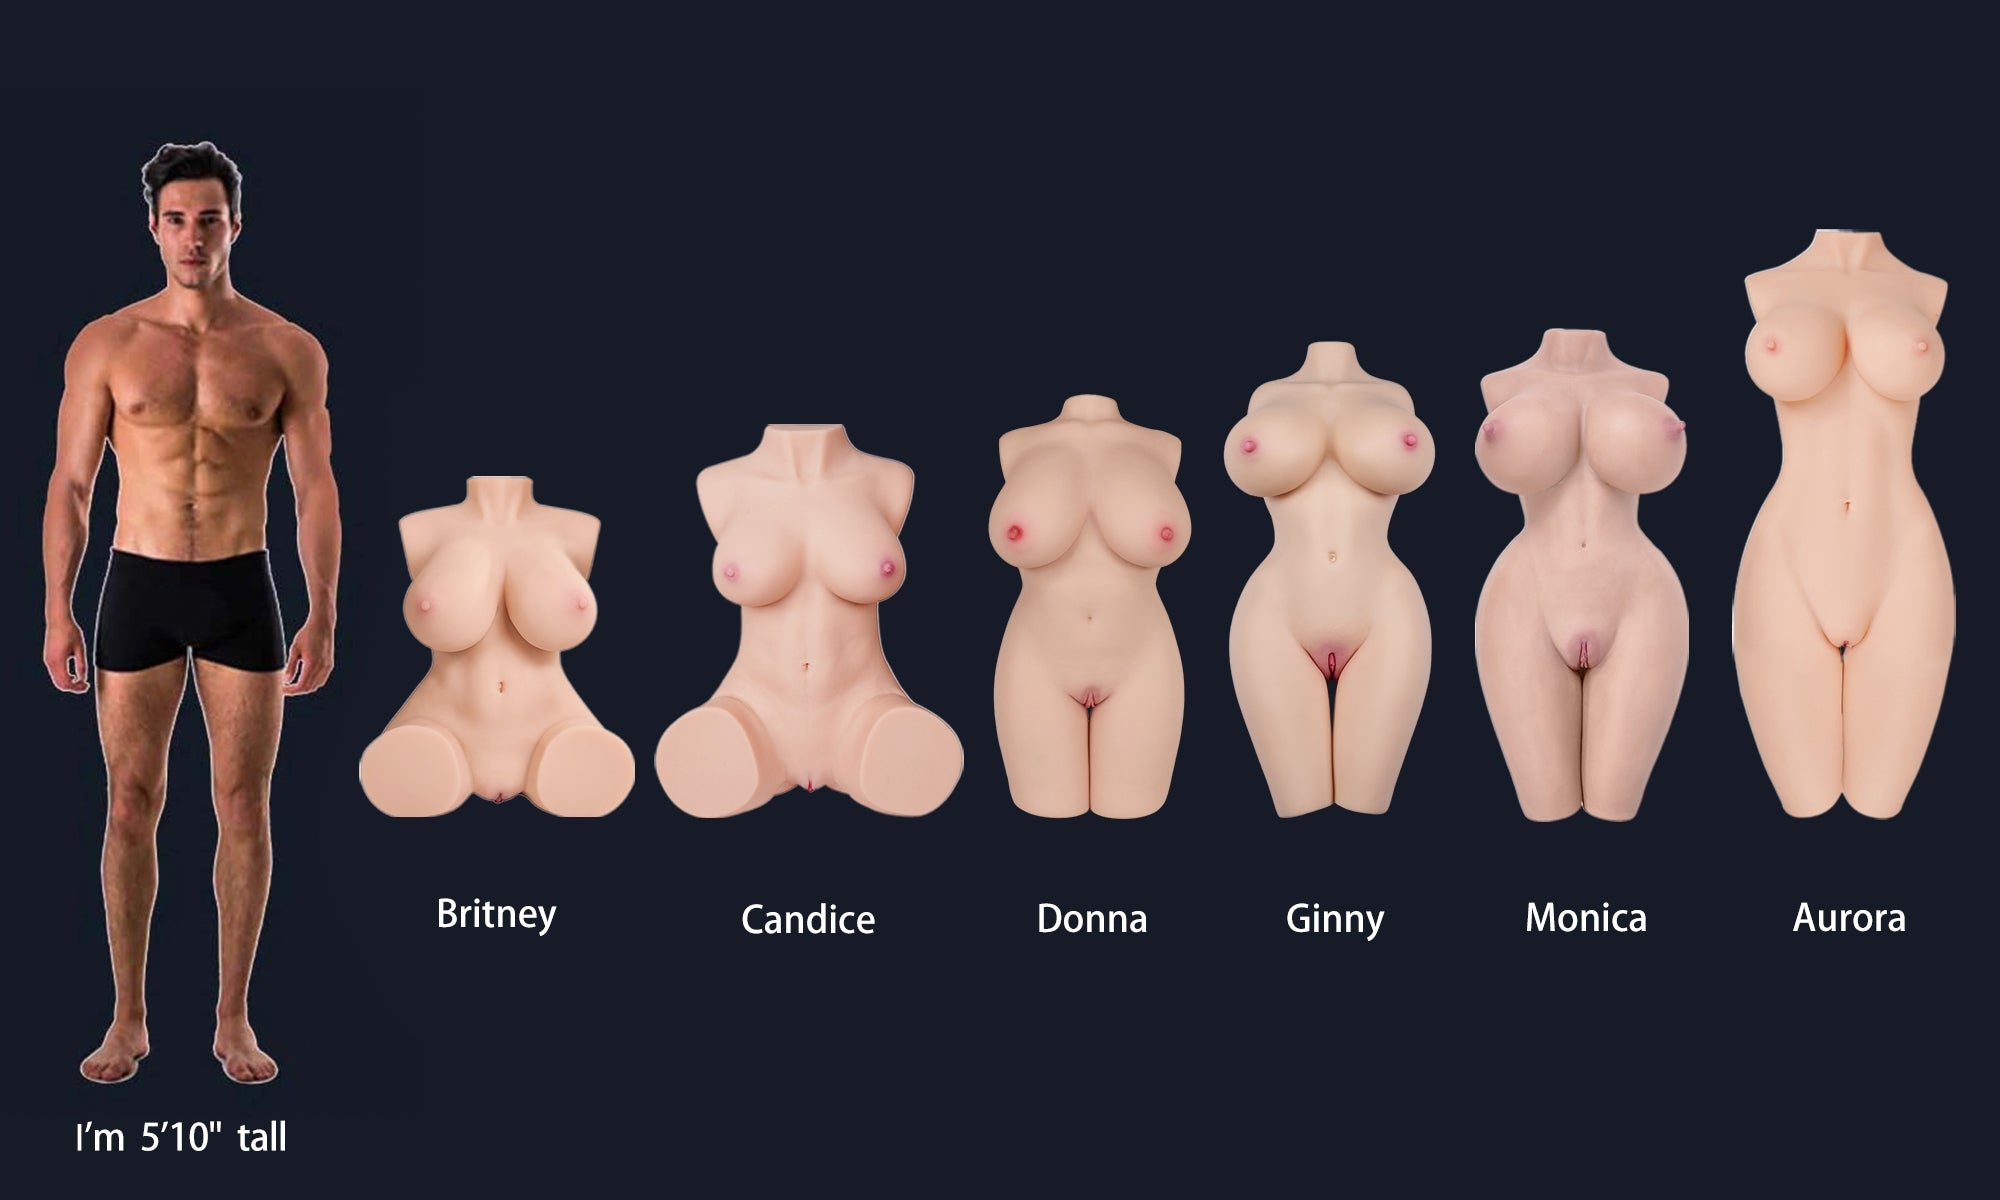 britney doll comparison with  other hot dolls.jpeg__PID:025d70f6-96bc-4cdf-bcc1-d6146b501227